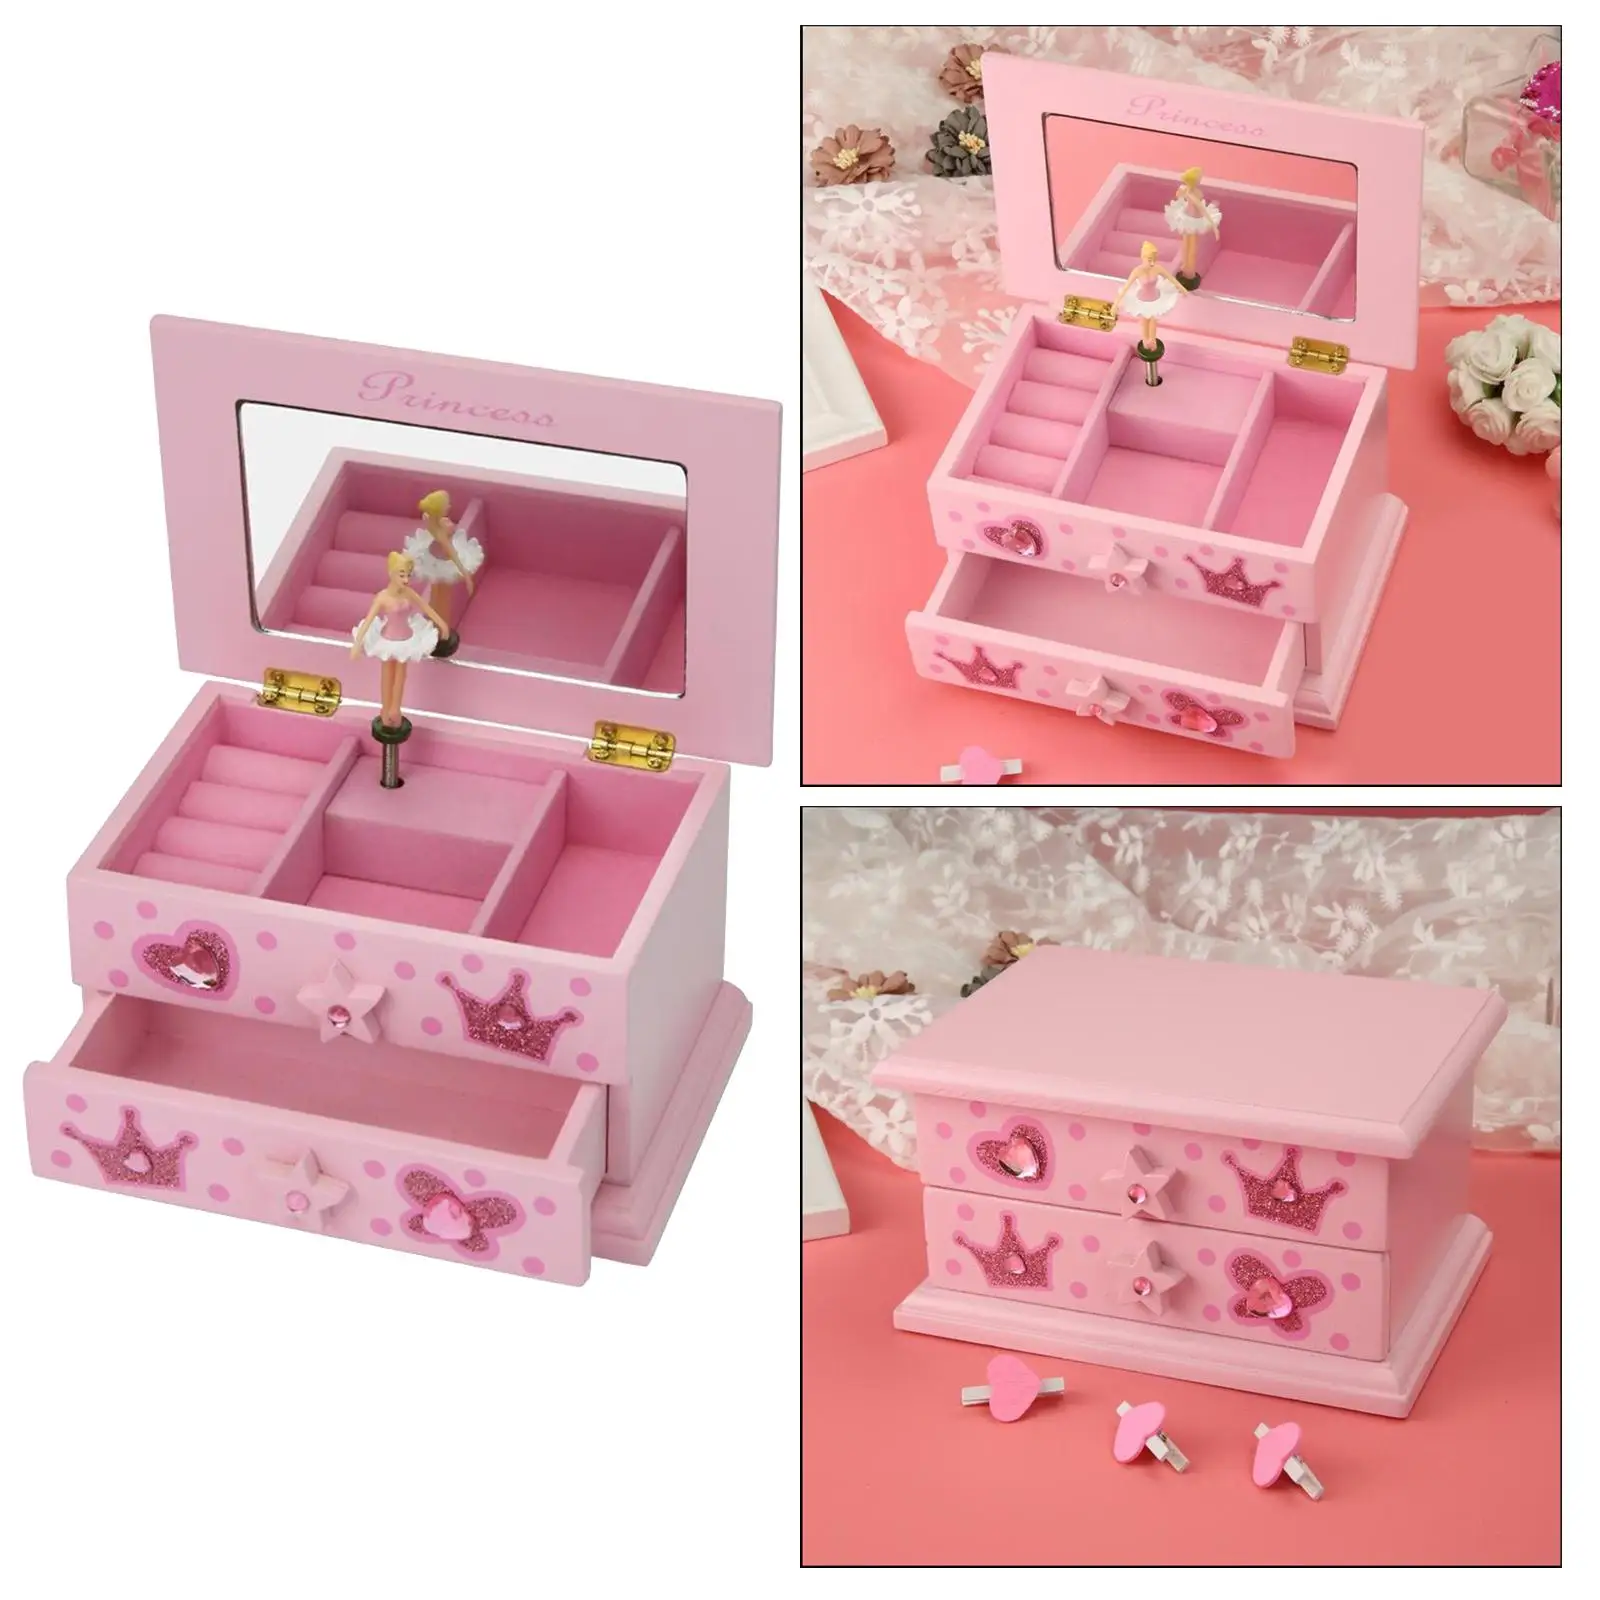 Jewelry Box for Women Girls Jewelry Organizer Storage Case with Two Layers Display for Earrings Bracelets Rings Musical Box